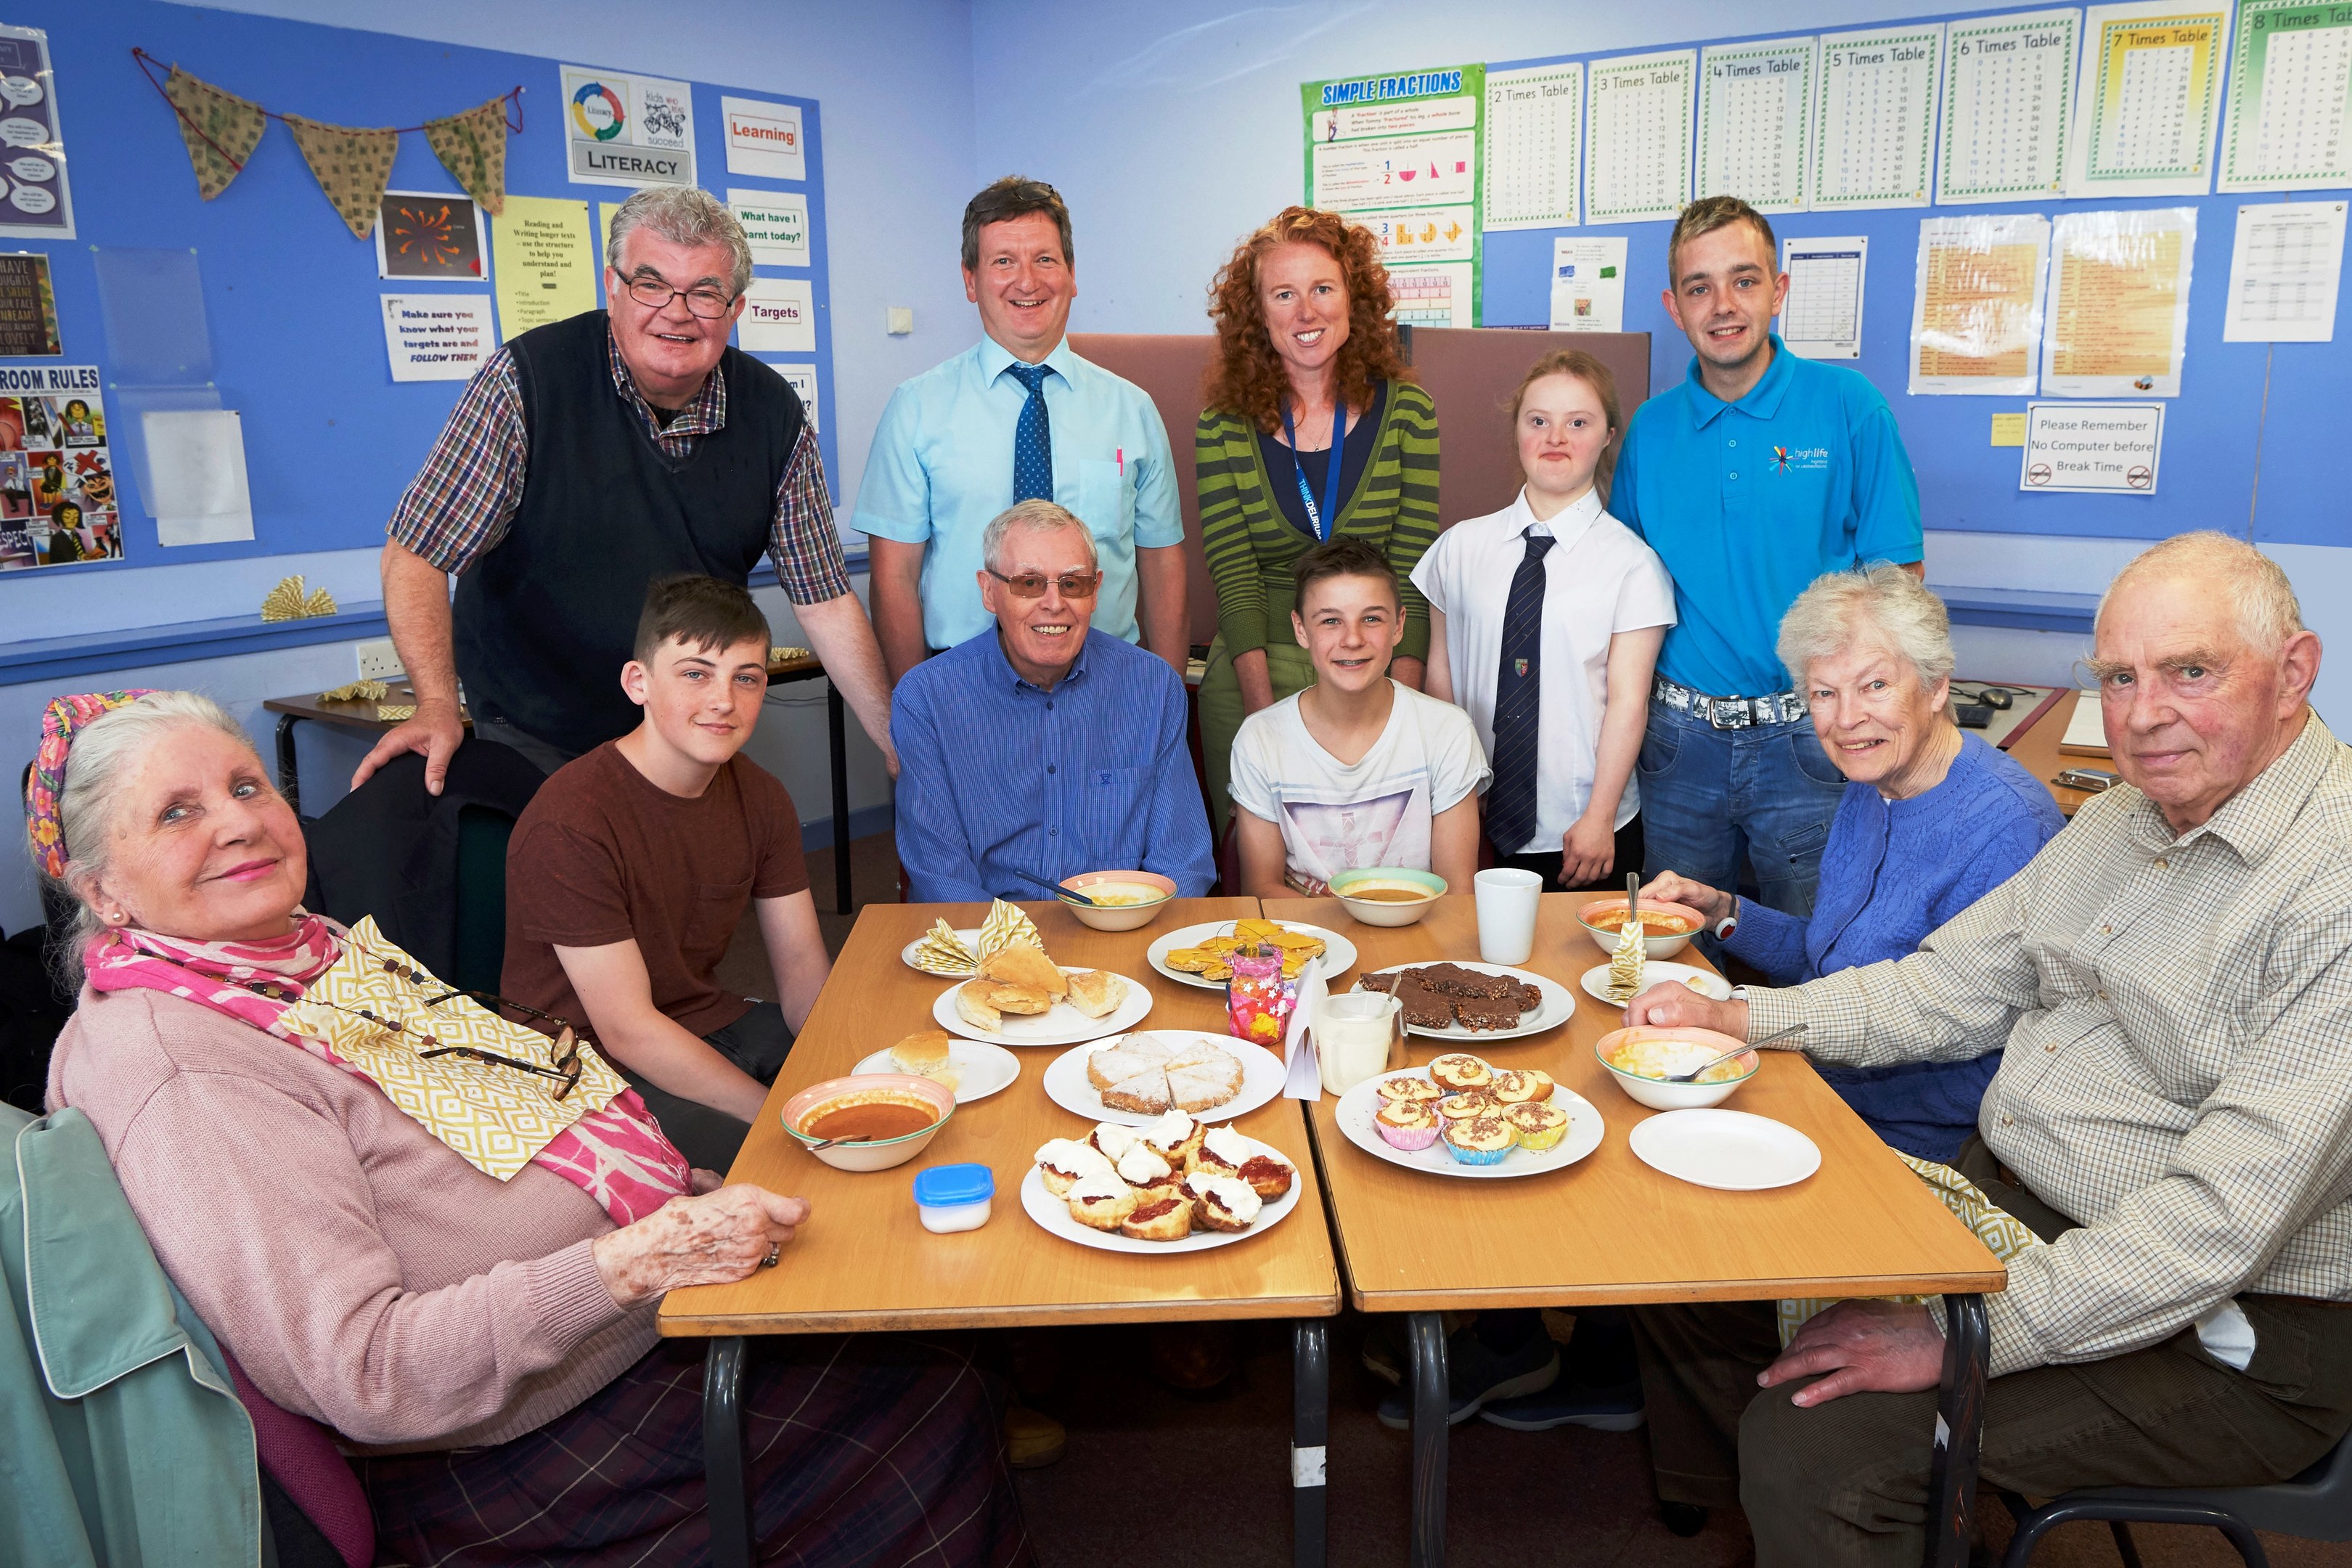 Black Isle Cares, Fortress Academy lunch.Black Isle Cares, Fortress Academy lunch.
Back Left to Right, Brian Devlin,BIC, Alastair Ferans (Fortrose Acad), Ruth Mantle, NHS Highland, Orla Mackenzie and Fraser Thomson, High Life Highland.
(Front) Joyce Carpenter, Brooklyn Sutherland, Peter Furniss, Cory MacRitchie, Shona Anderson and Adam Anderson.